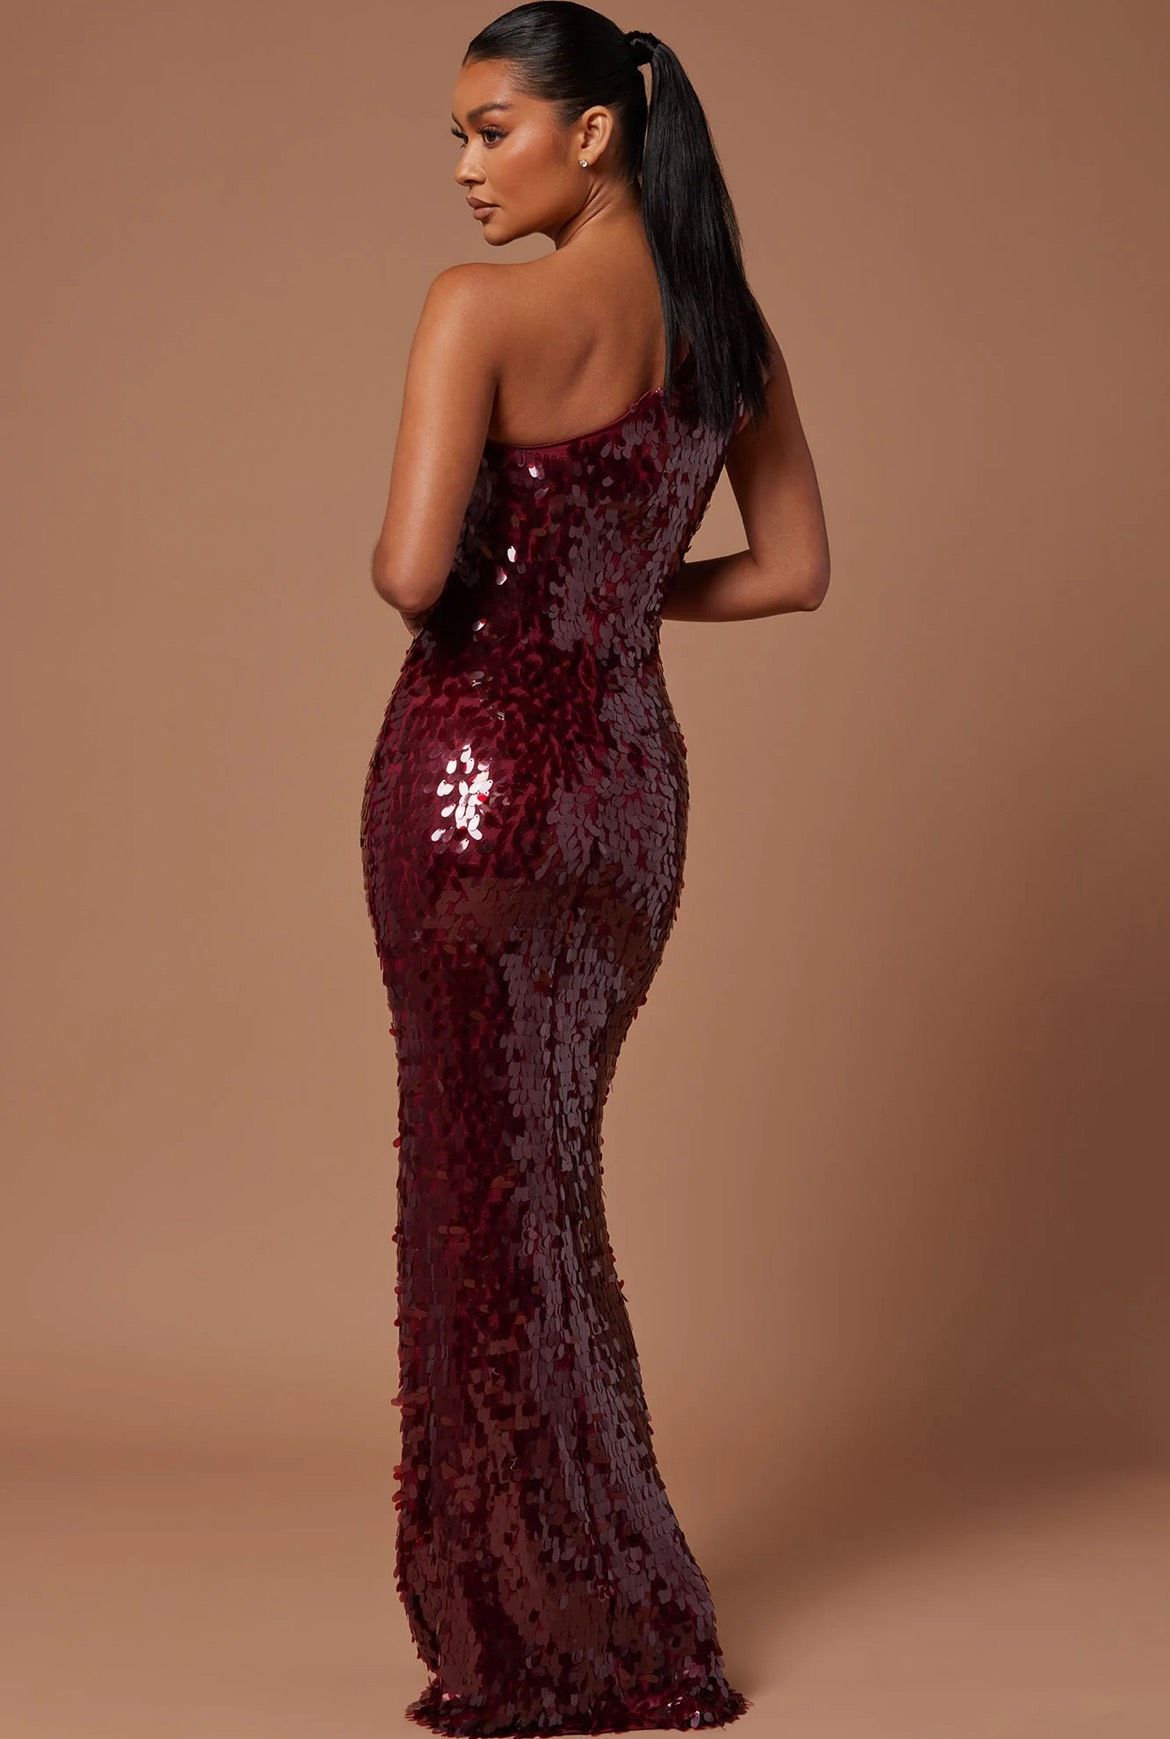 Style Karmen Payette Gown - Wine Fashion Nova Size XS Prom One Shoulder Red Floor Length Maxi on Queenly